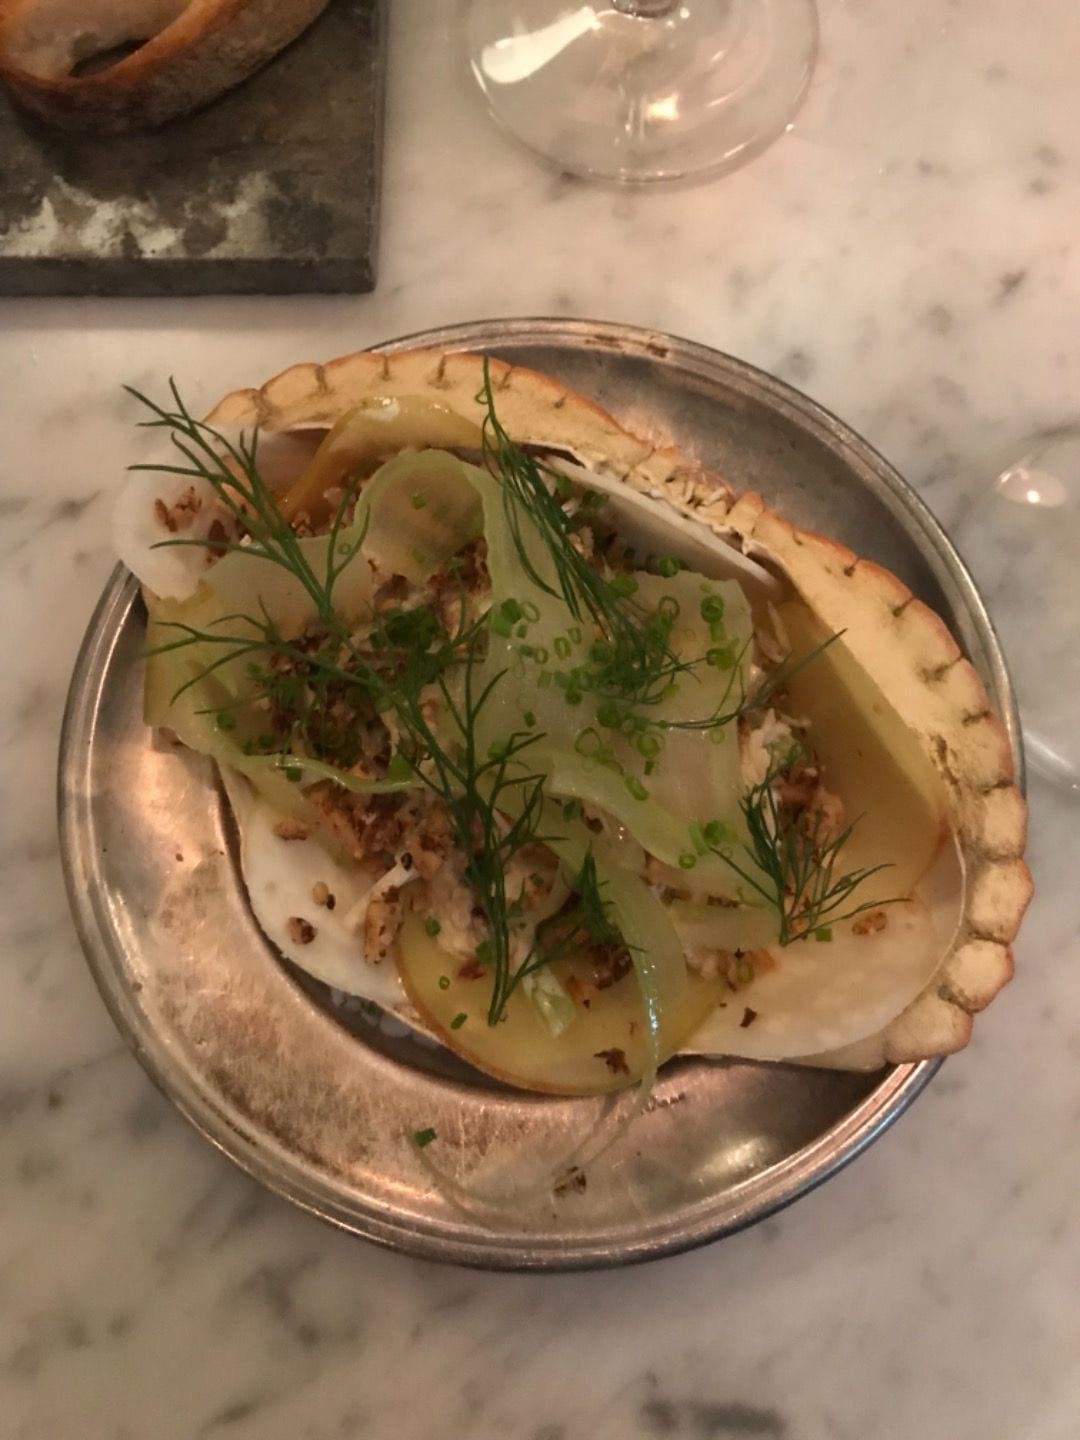 Photo from Portal Restaurant by Mia L. (13/10/2019)